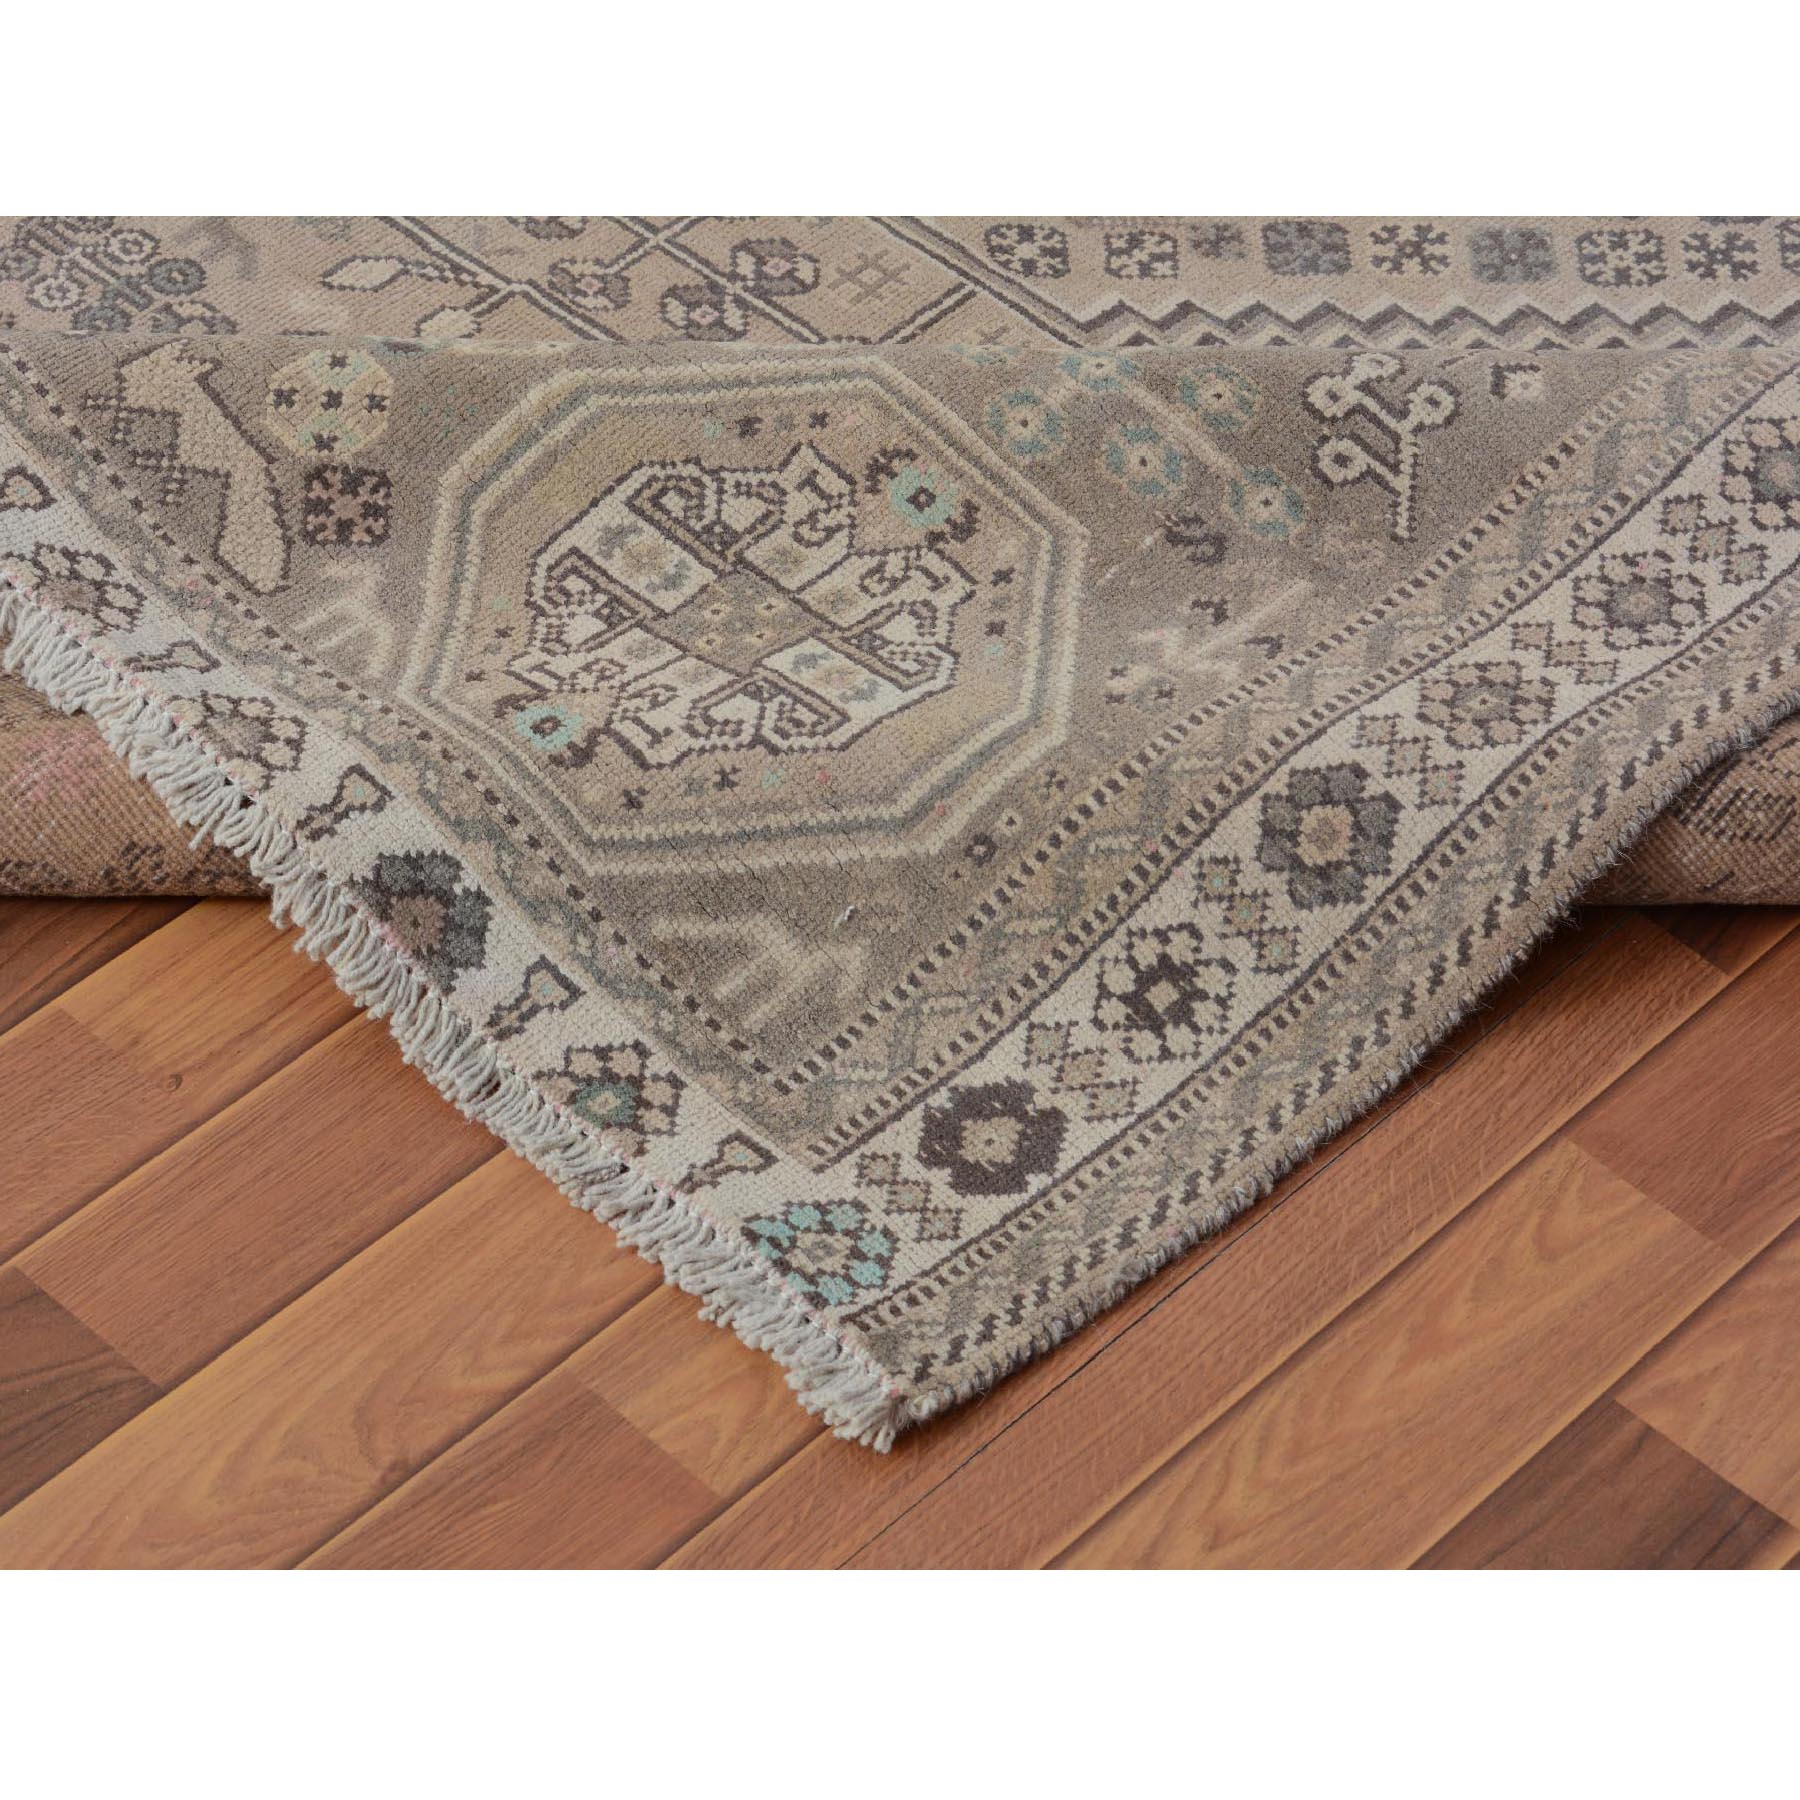 6-3 x9-4  Distressed Colors Vintage and Worn Down Persian Shiraz Pure Wool Hand Knotted Oriental Rug 